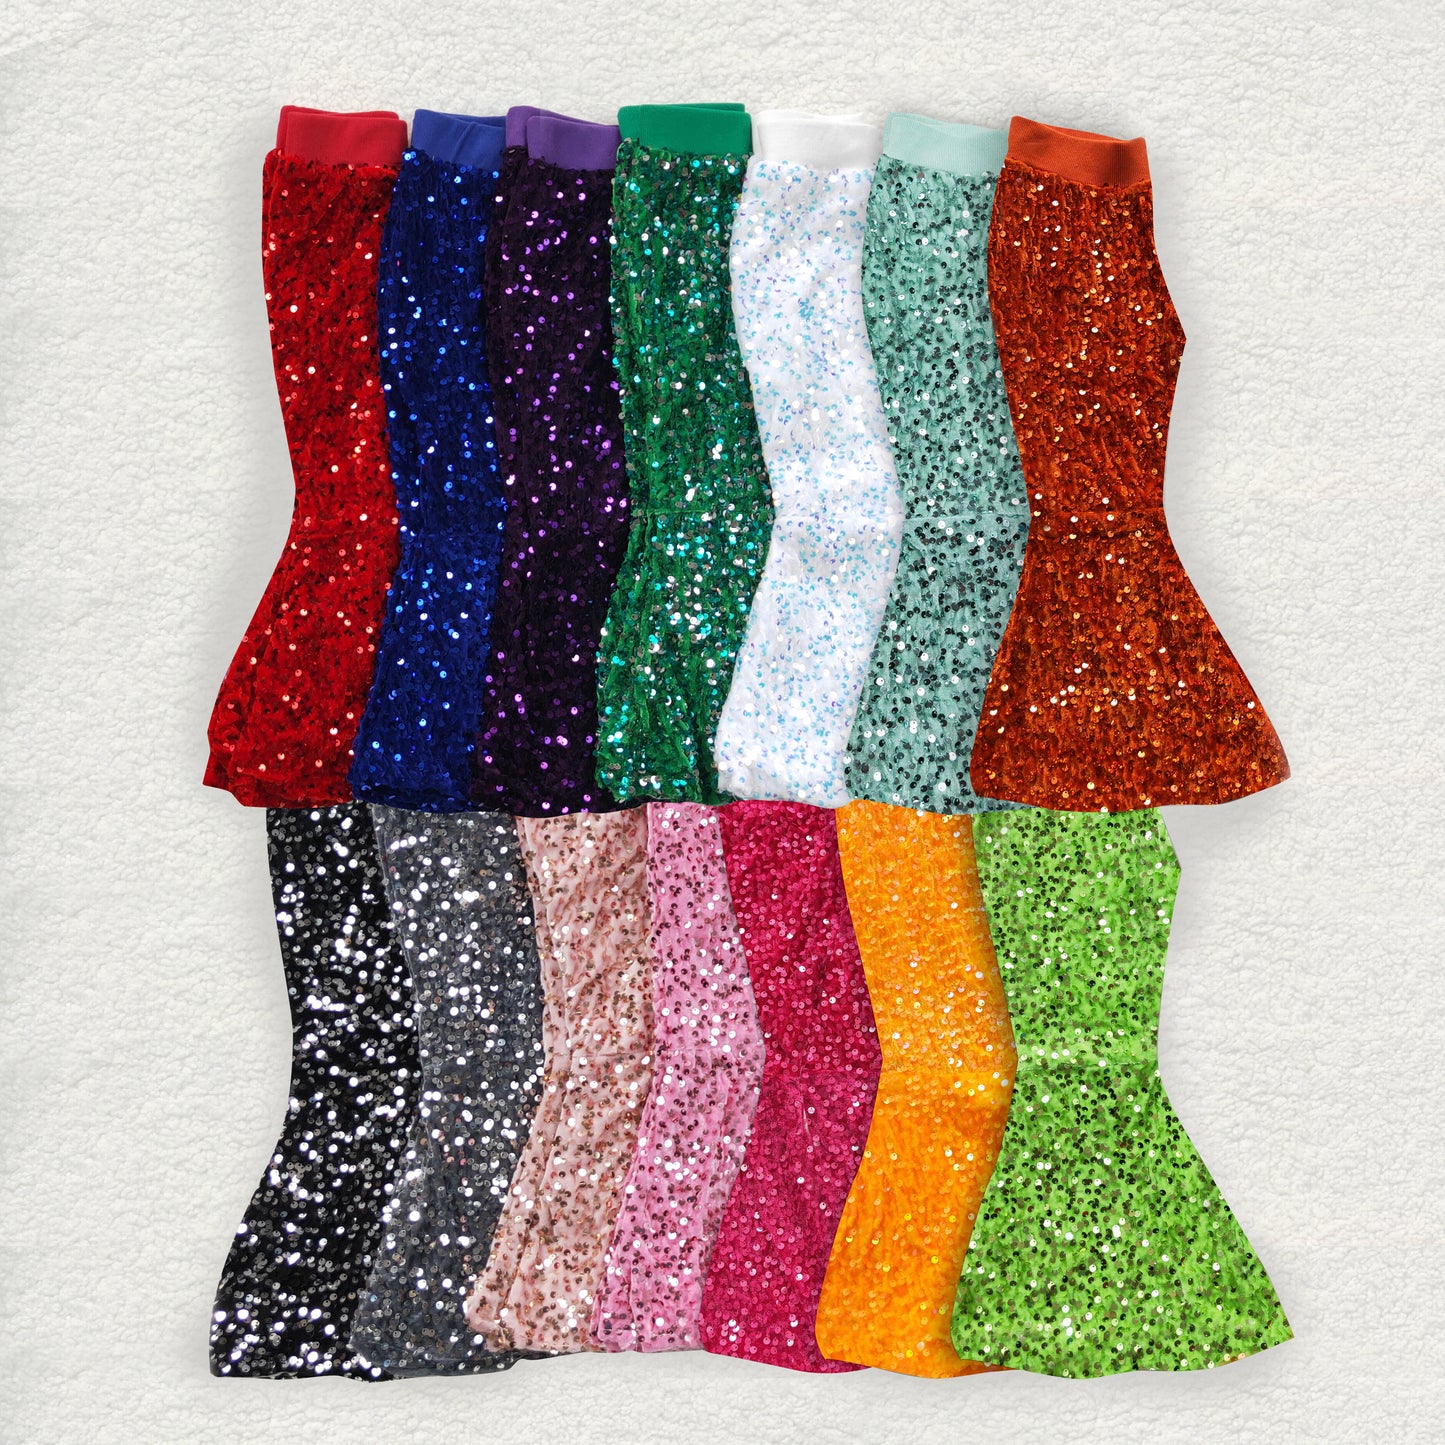 Wholesale toddle girls sequins bell bottoms bling bling sparkle pants